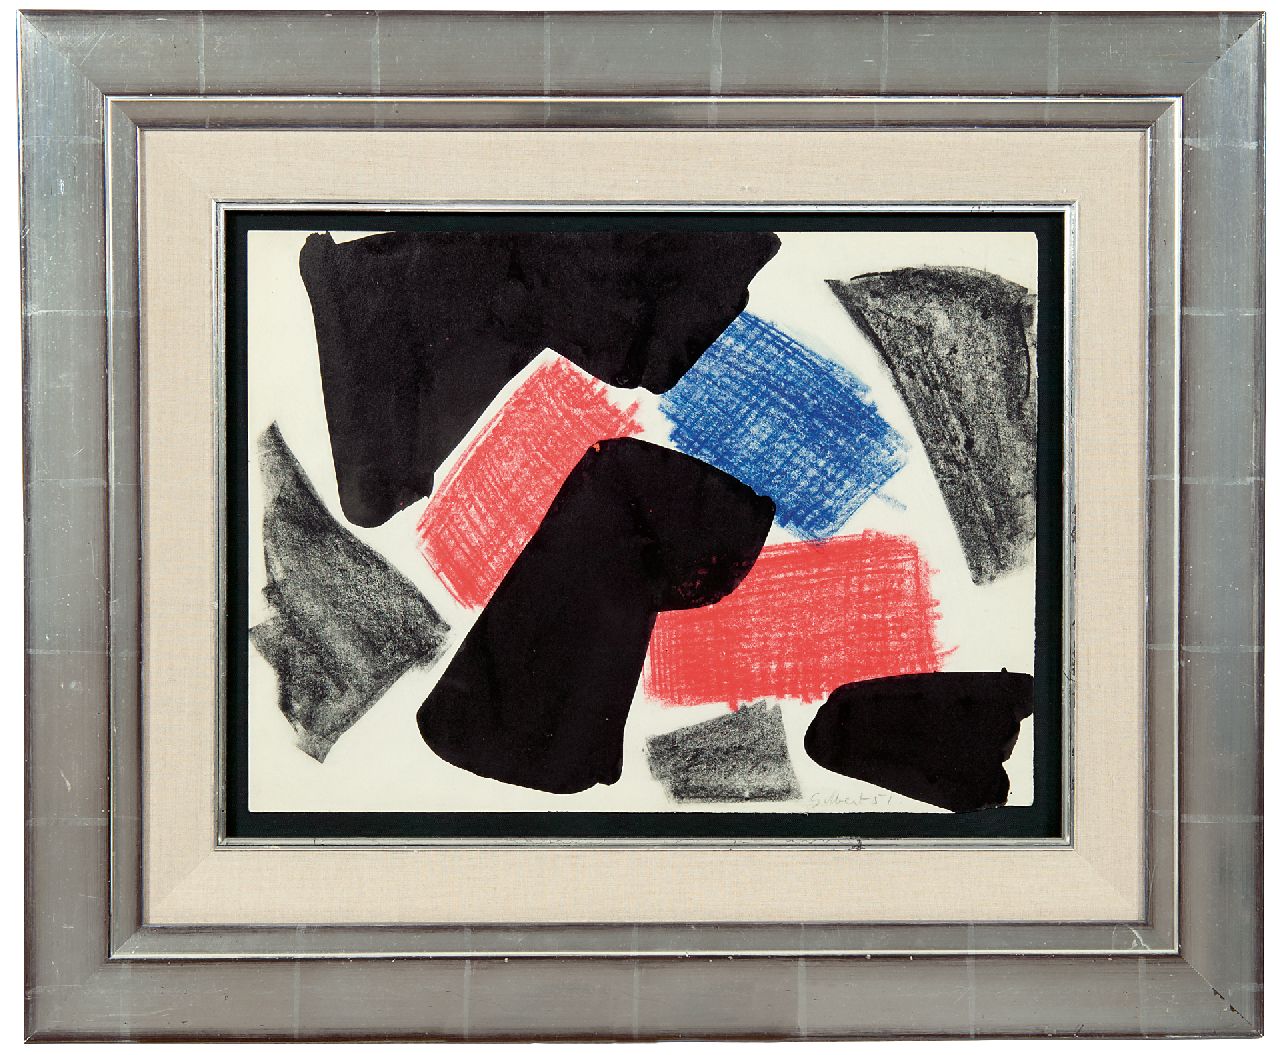 Gilbert S.  | Stephen Gilbert | Watercolours and drawings offered for sale | Untitled, ink, wax crayons and black chalk on paper 27.8 x 38.0 cm, signed l.r. and dated '51